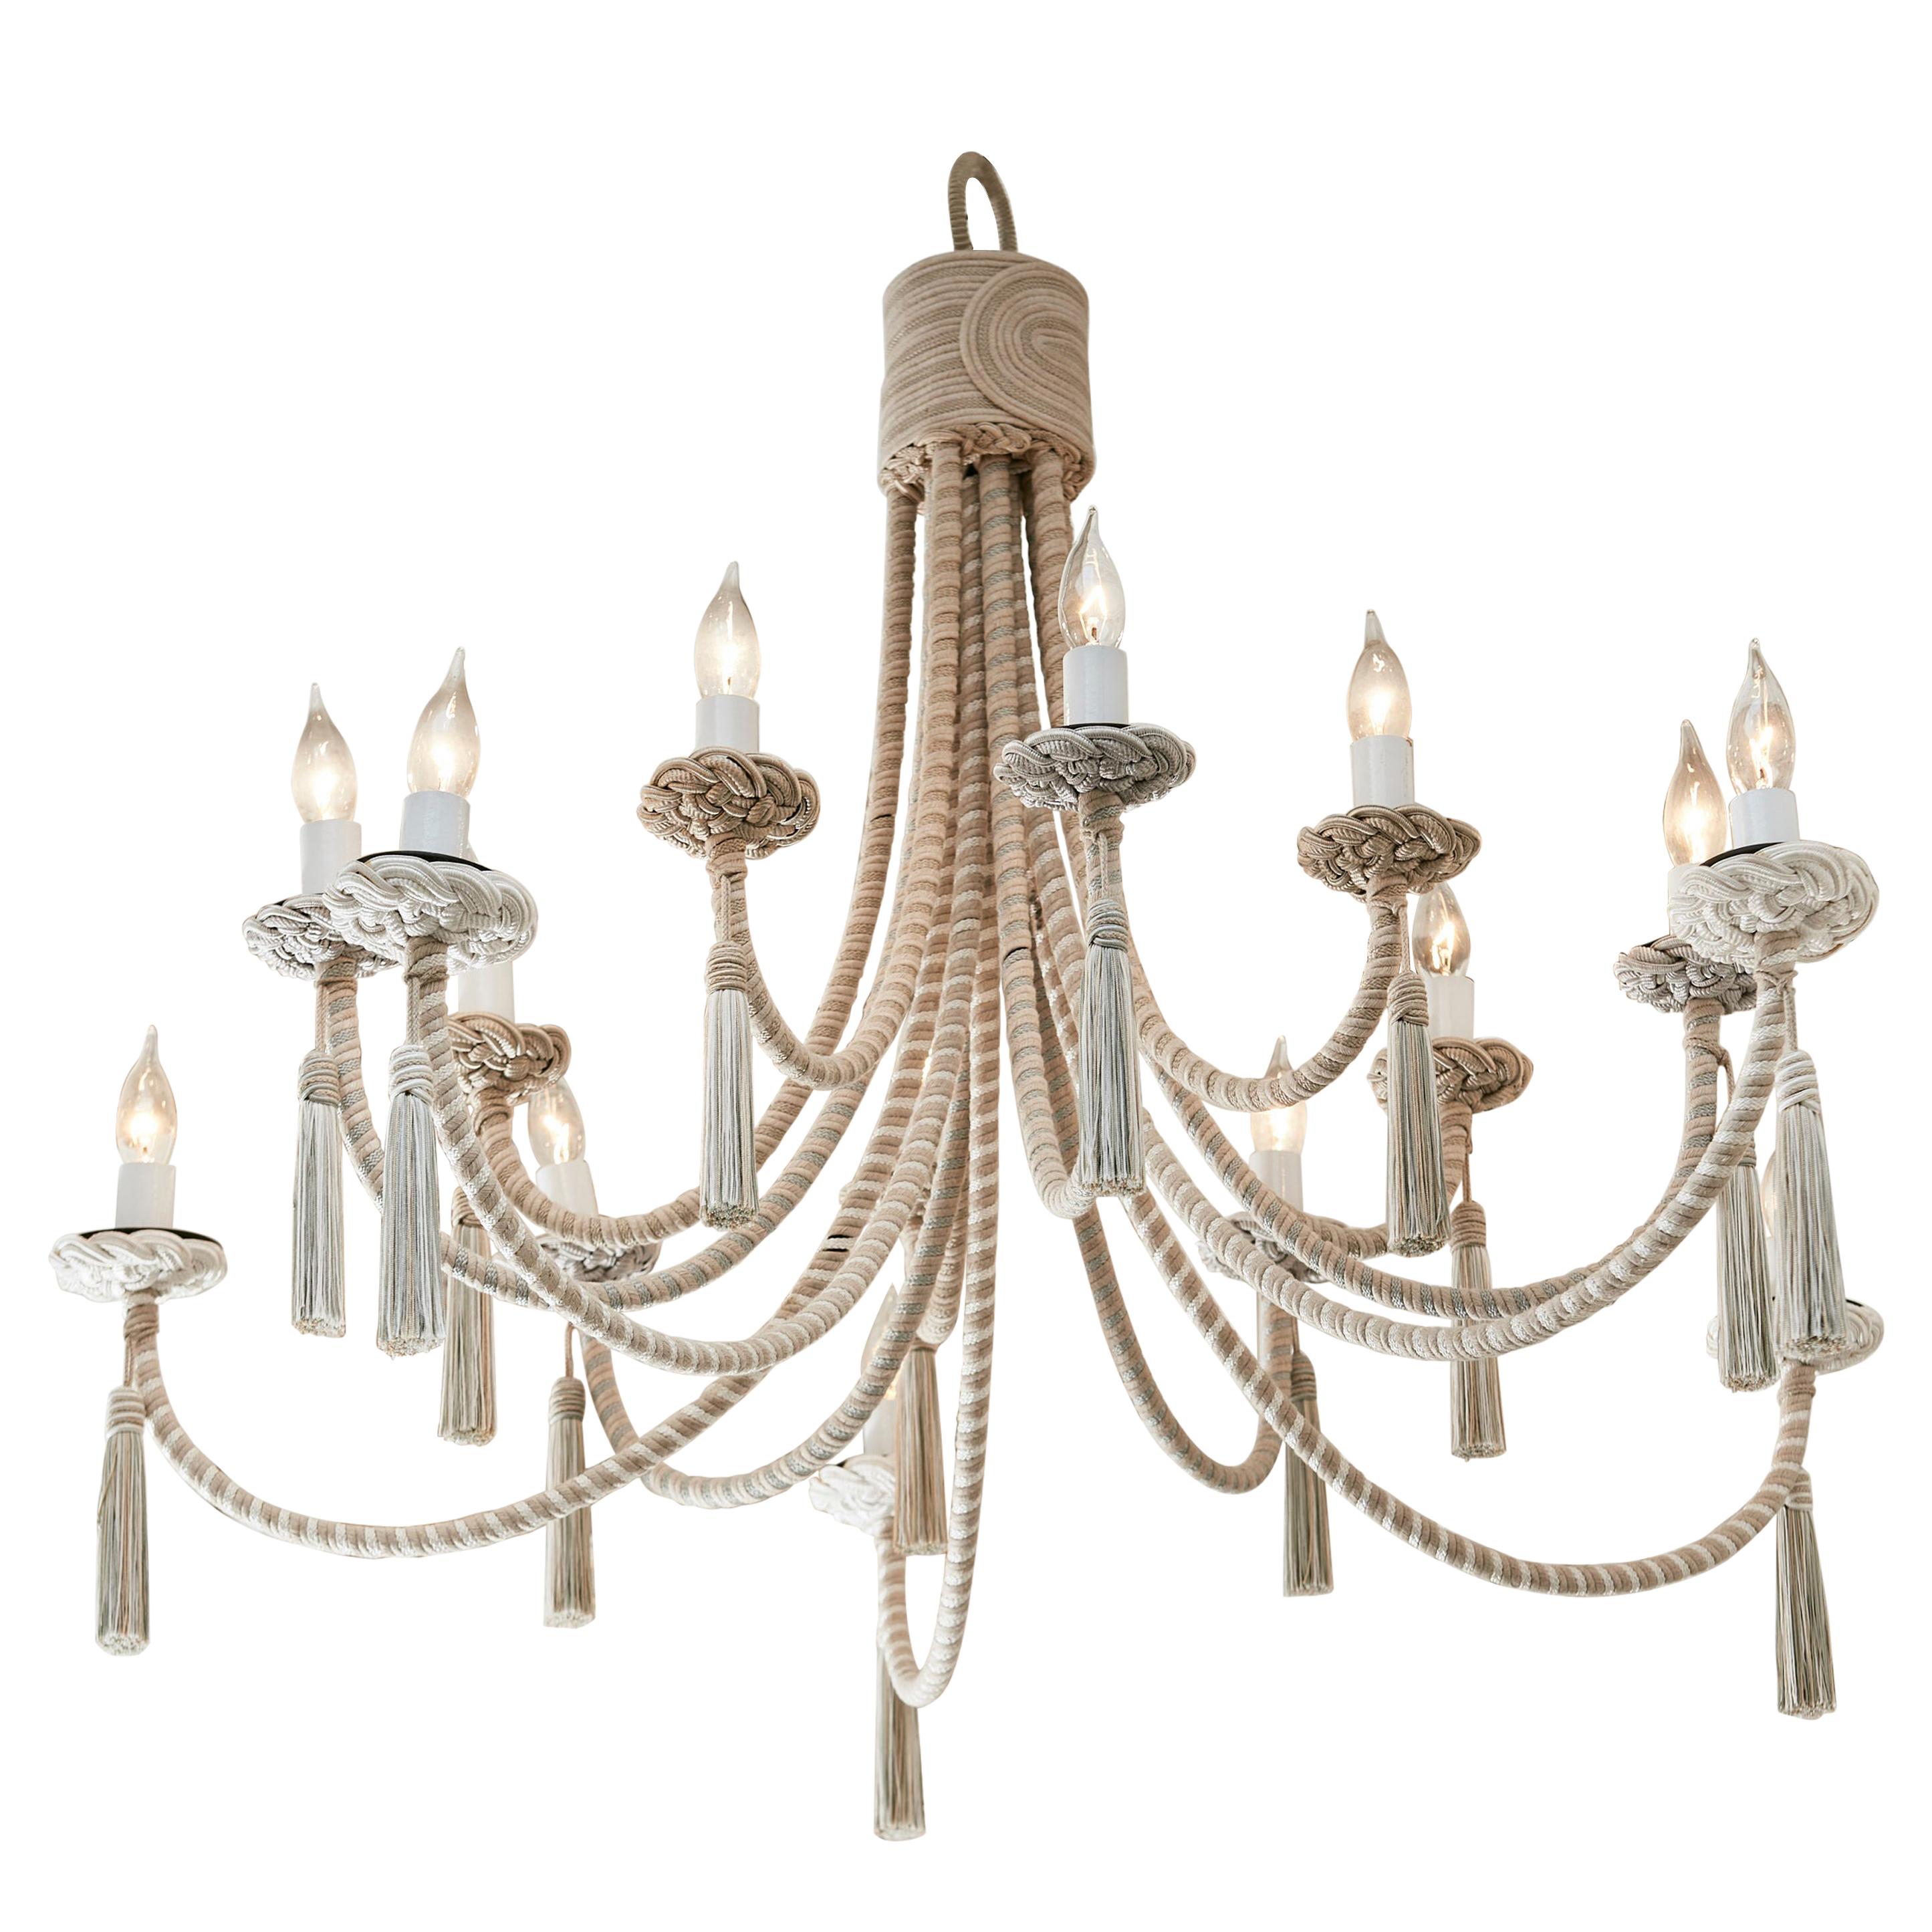 Chandelier Wrapped in Passementerie, Silk Cords and Jute Cords